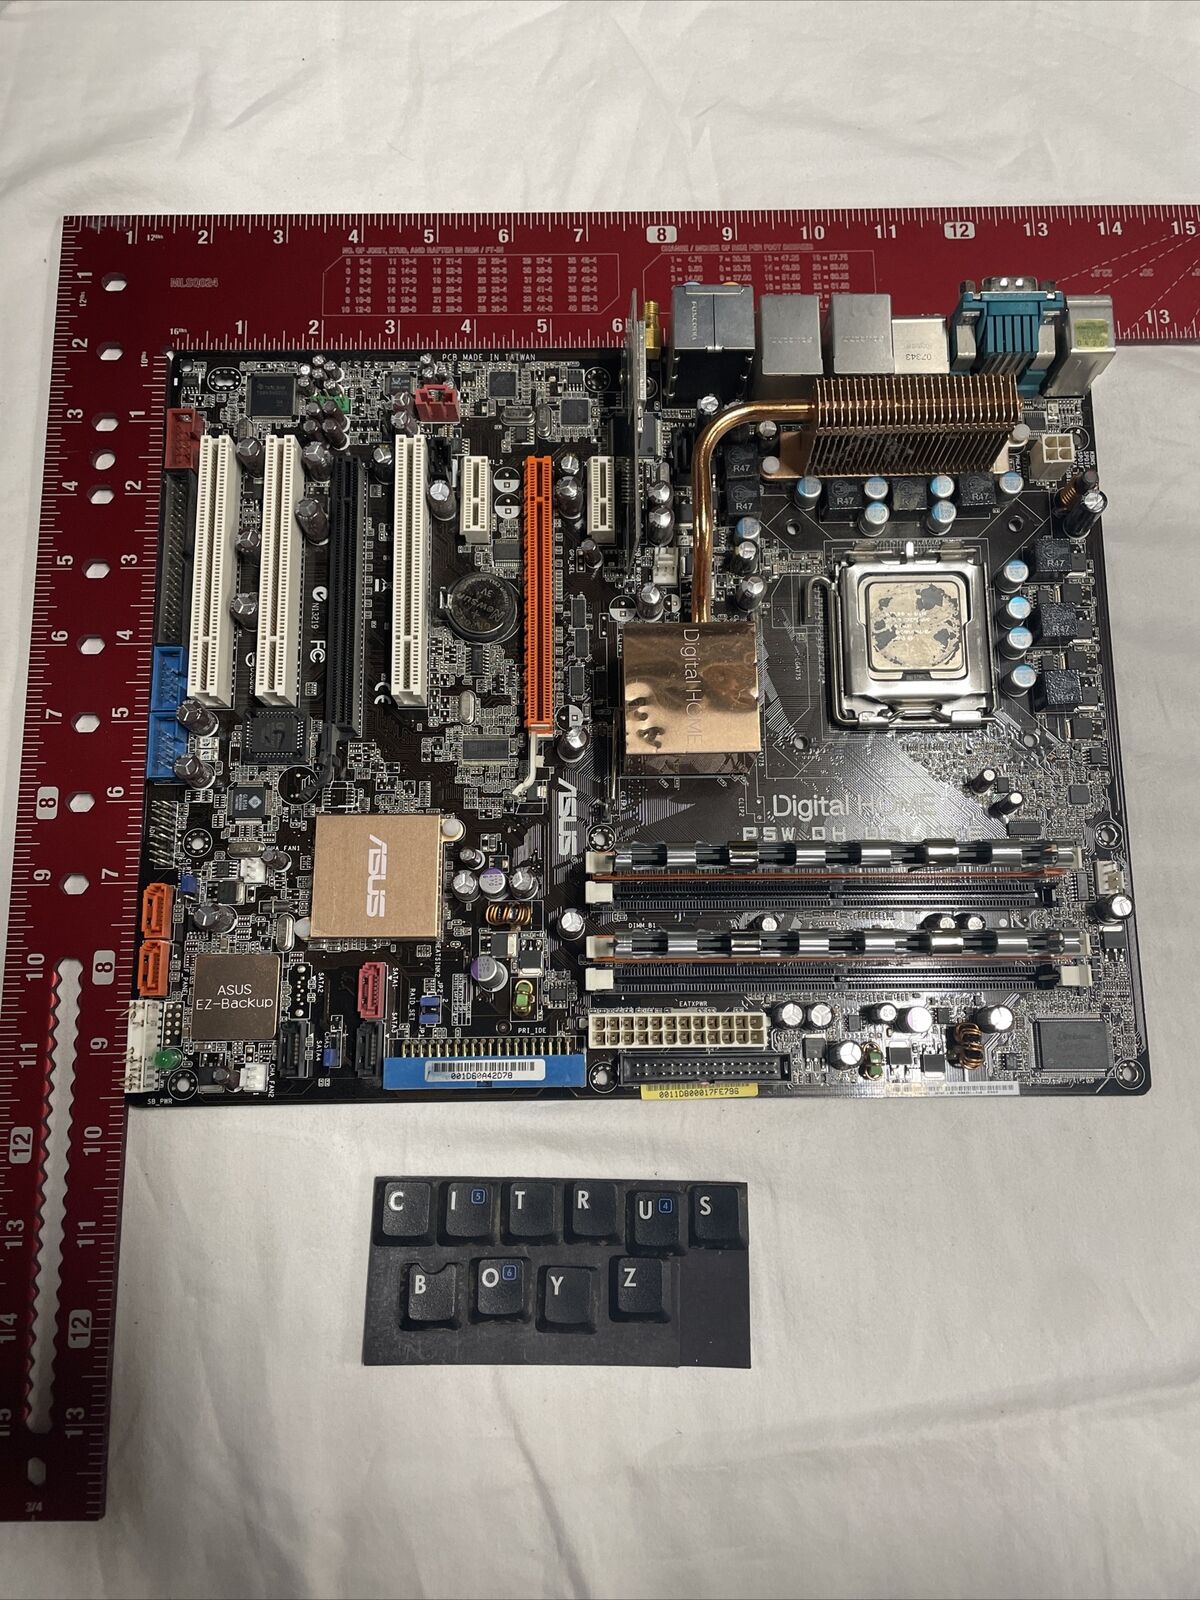 ASUS P5W DH Deluxe Digital Home Series with Intel 975X/ICH7R ATX Motherboard  